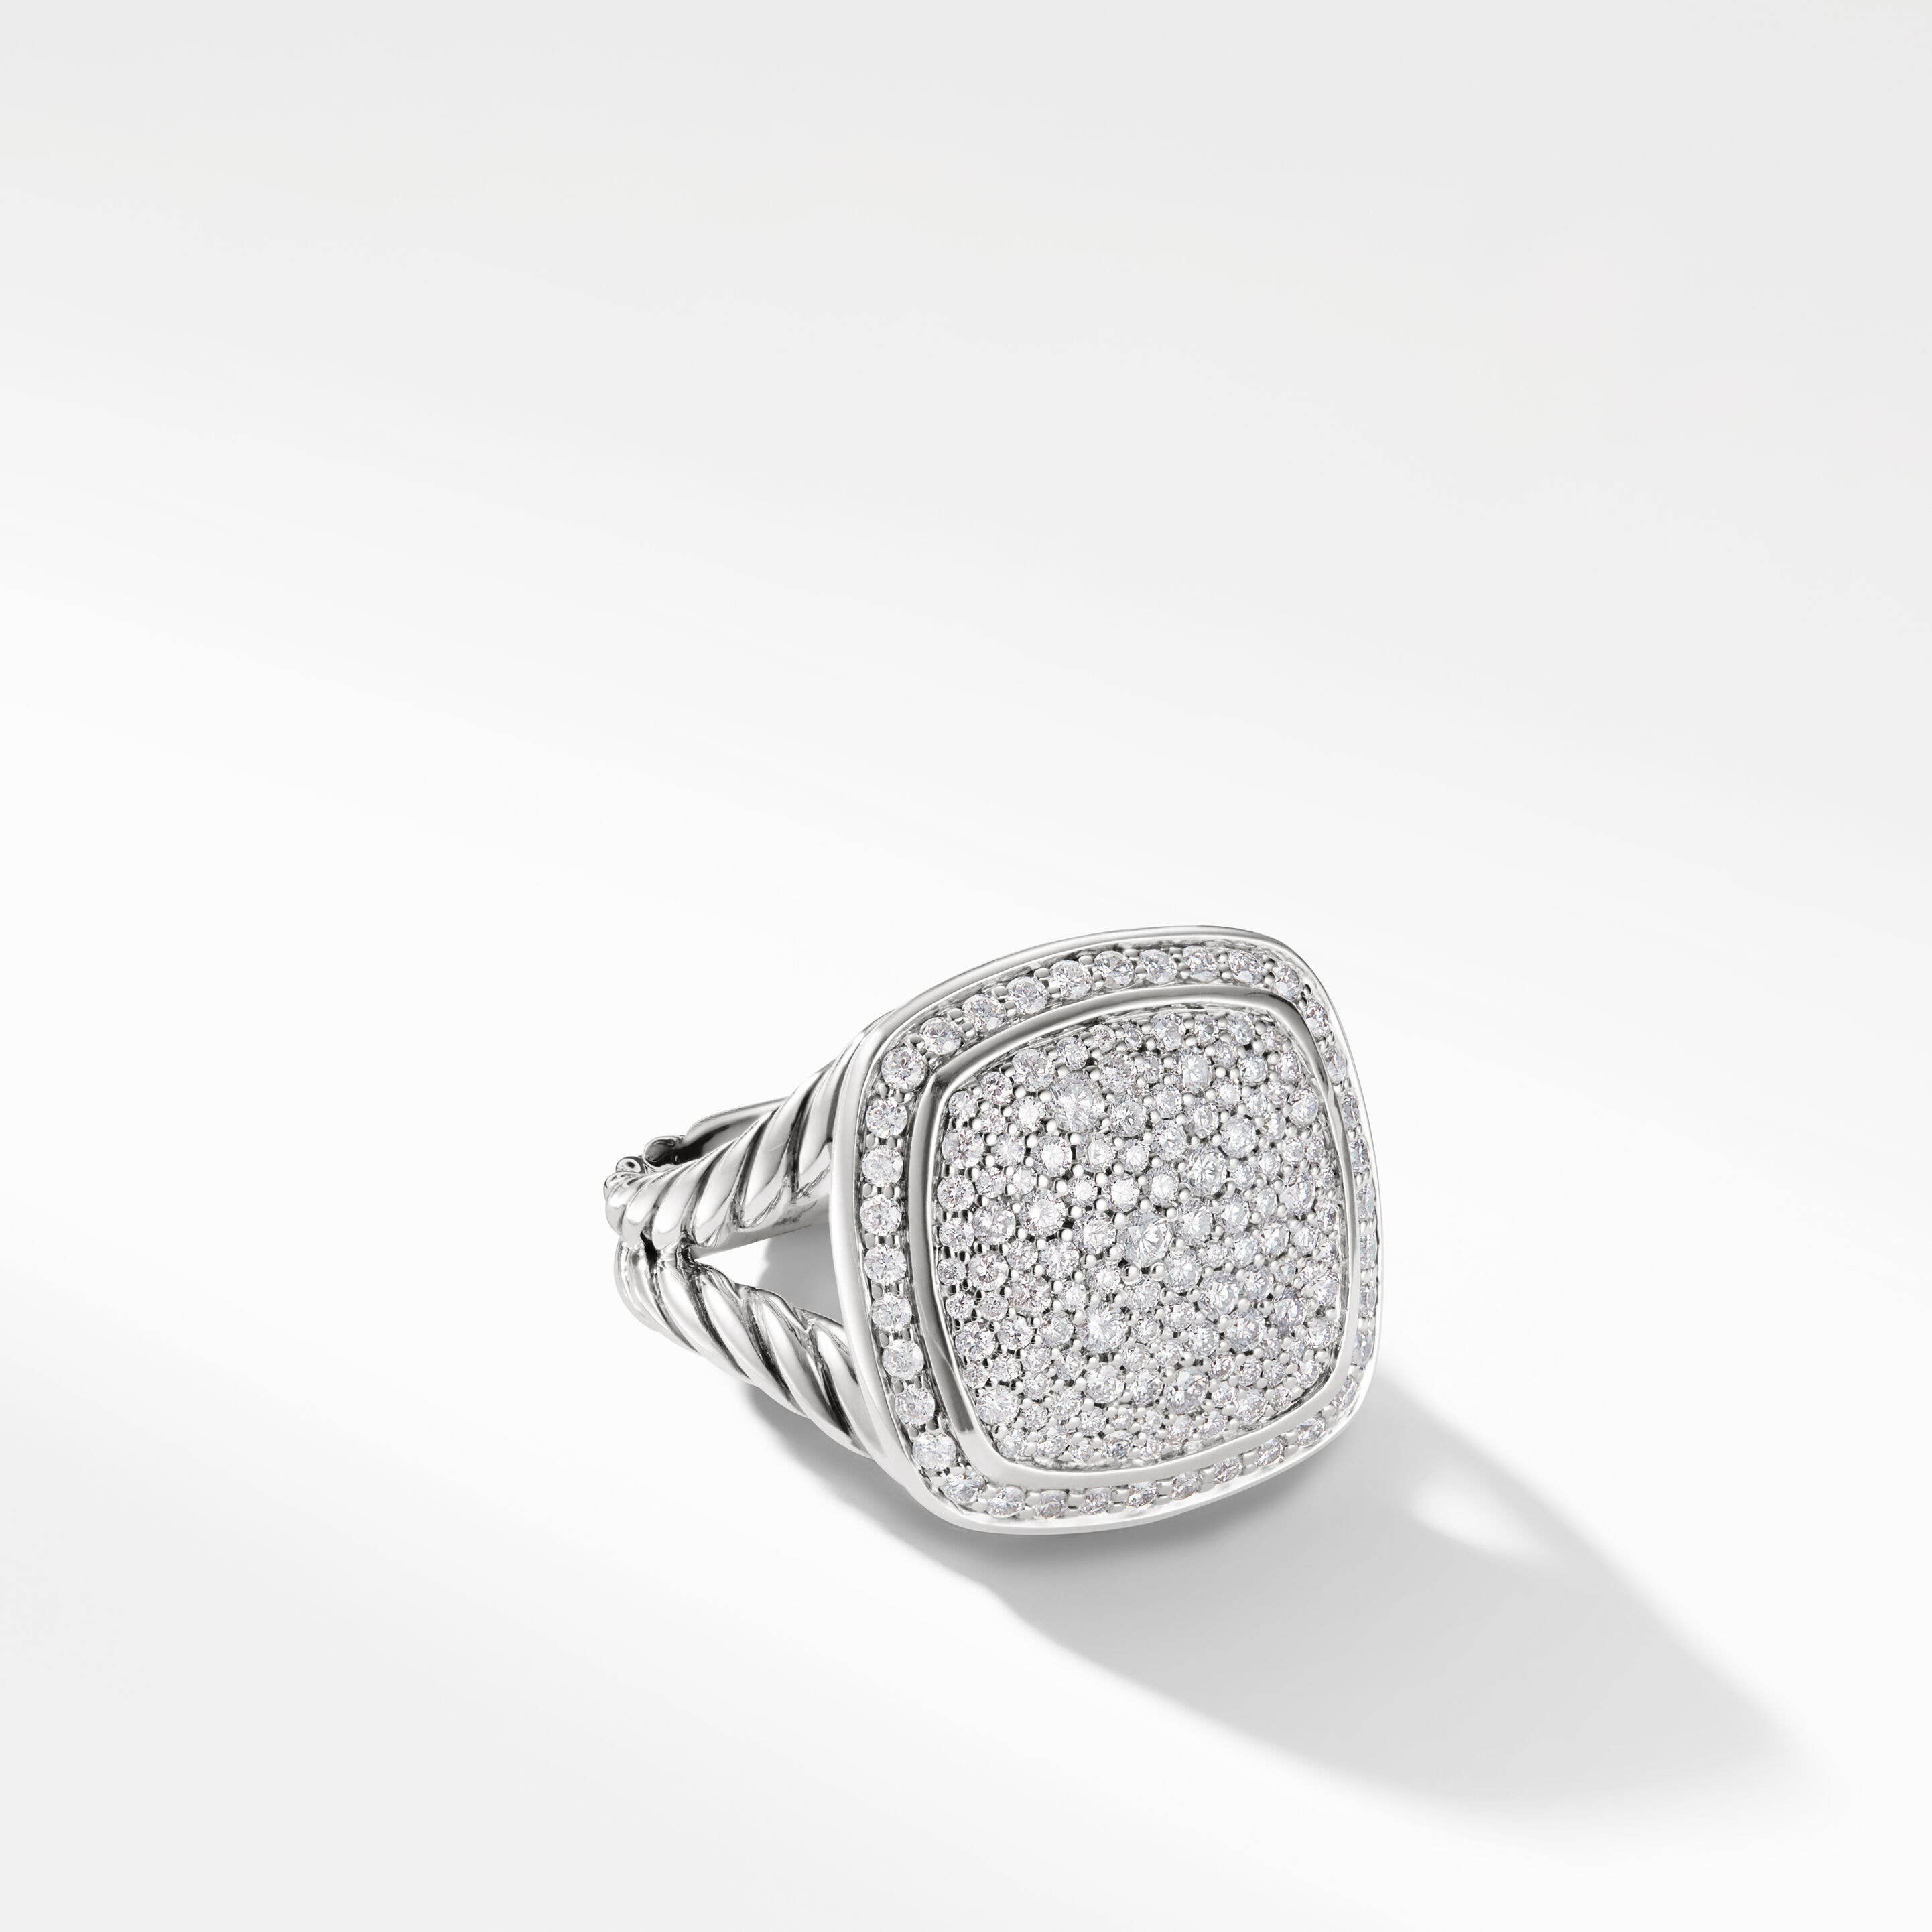 Albion® Ring in Sterling Silver with Pavé Diamonds